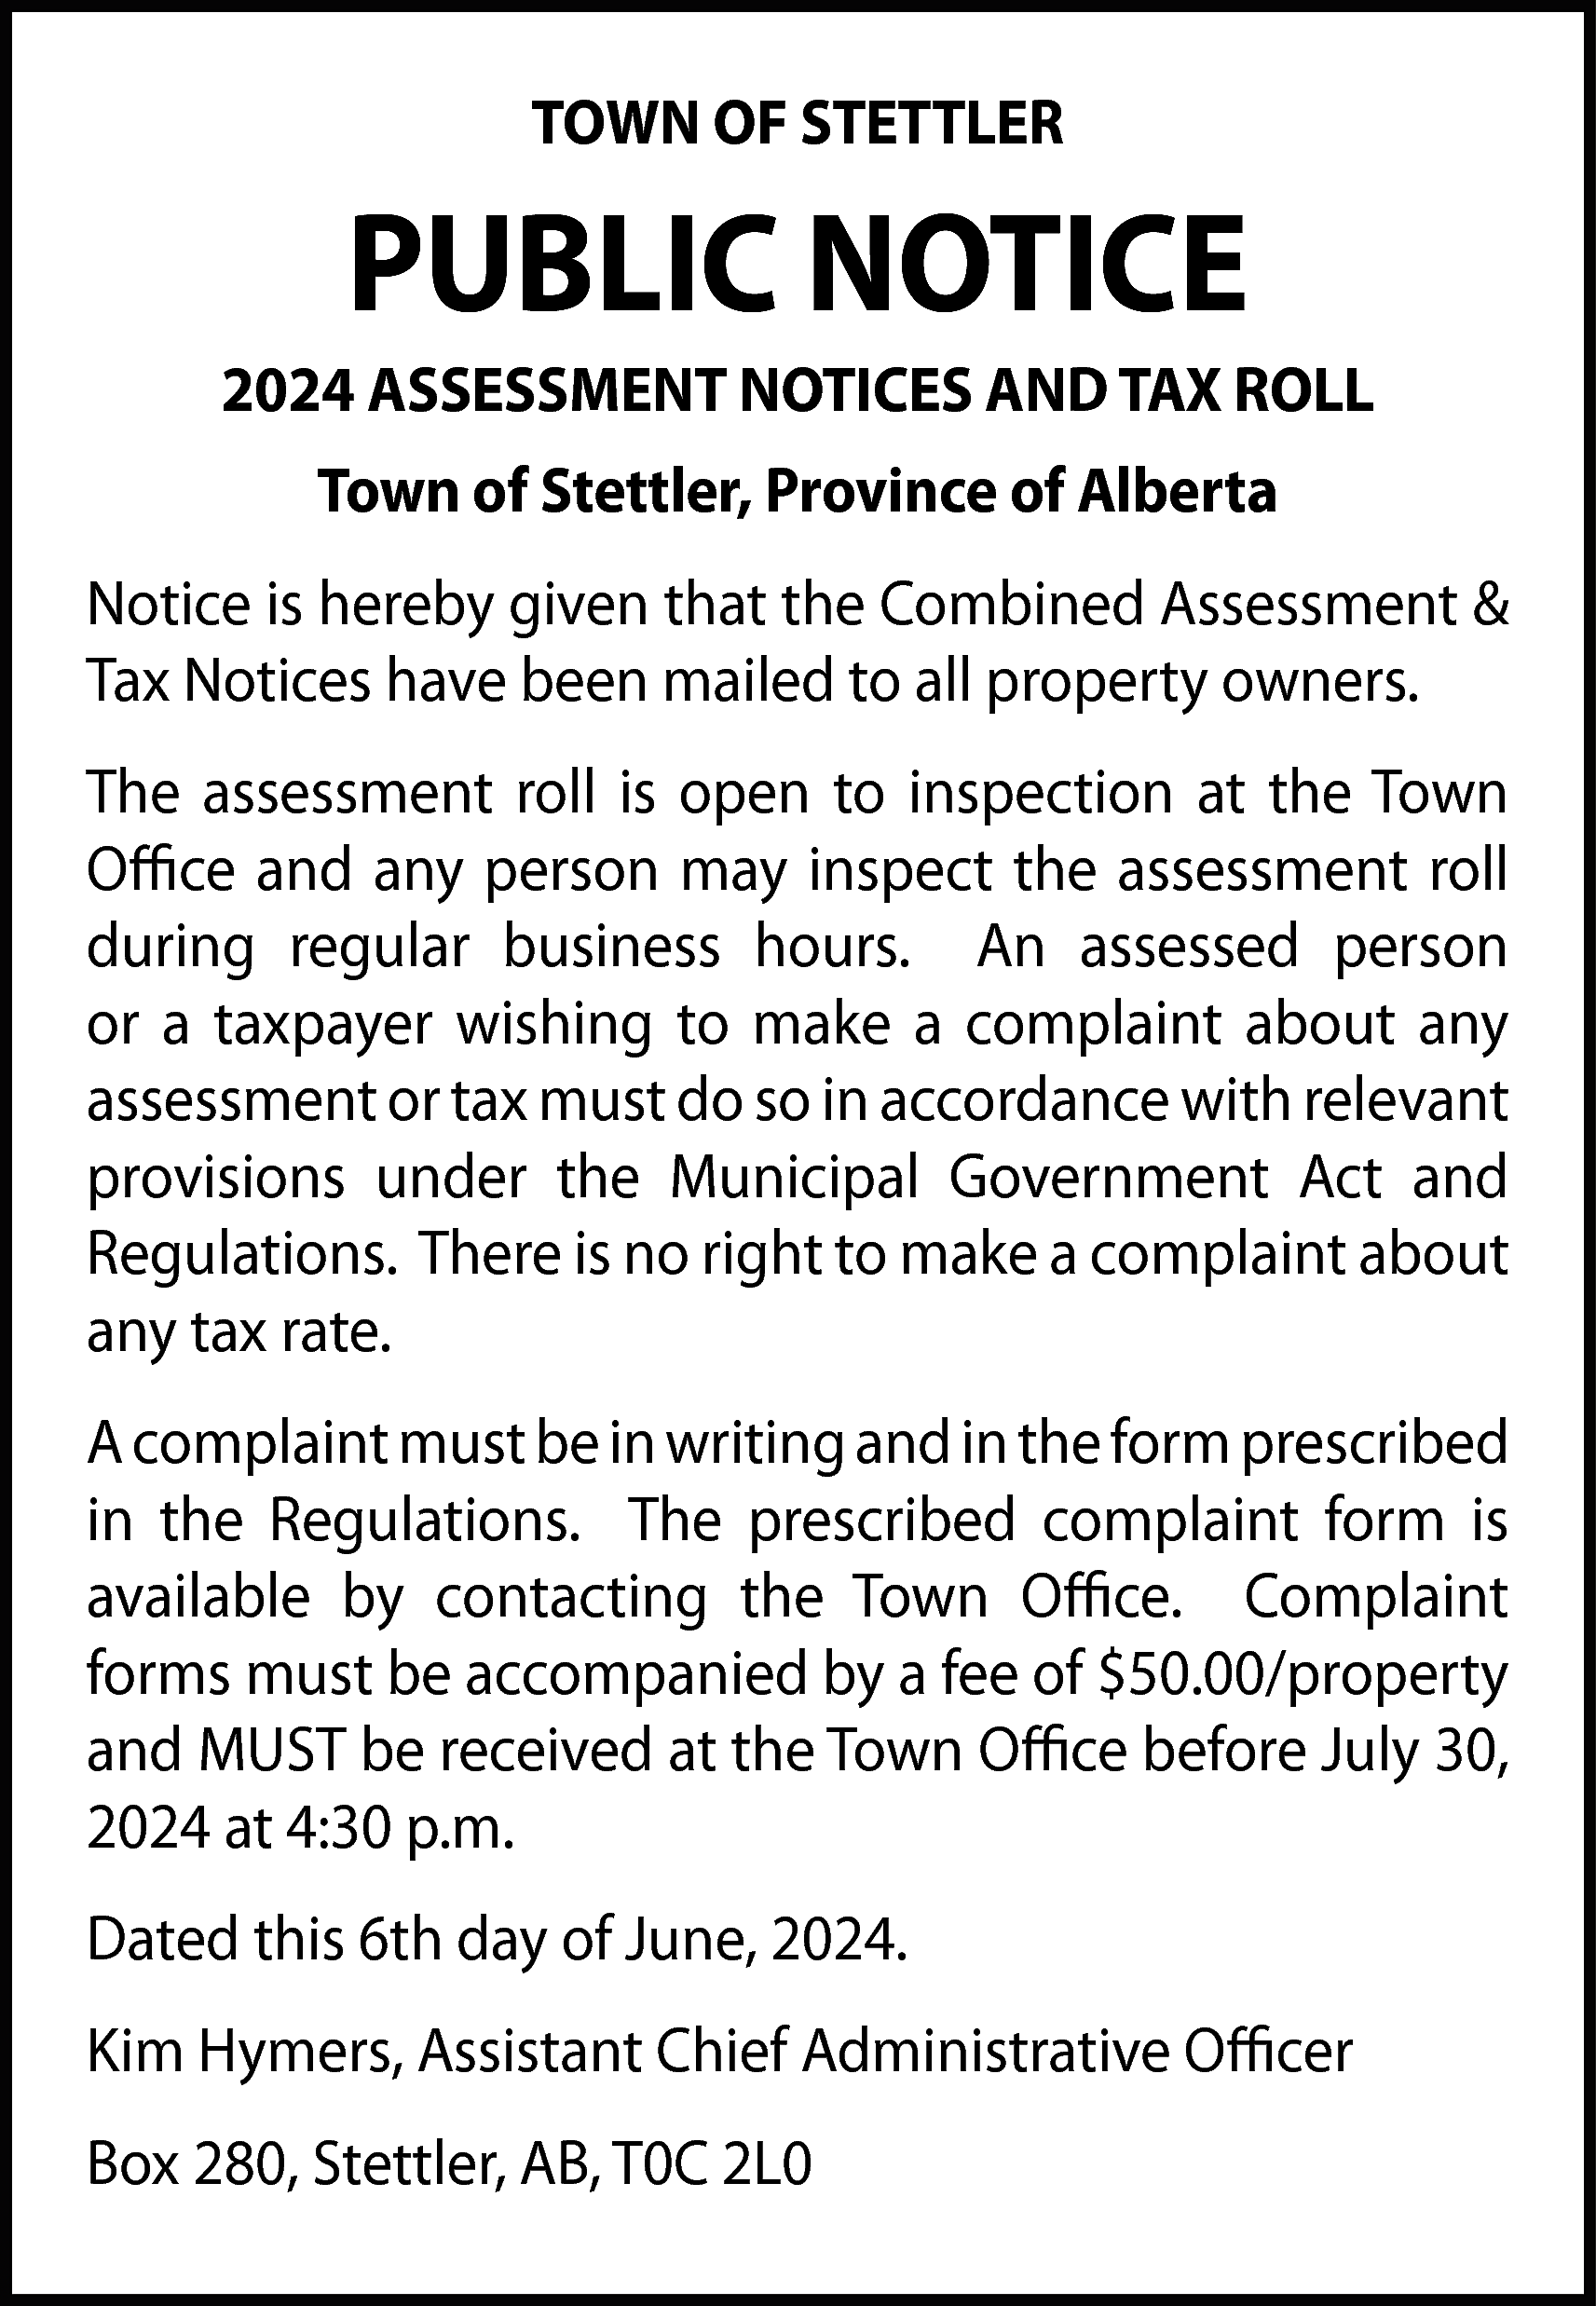 TOWN OF STETTLER <br> <br>PUBLIC  TOWN OF STETTLER    PUBLIC NOTICE  2024 ASSESSMENT NOTICES AND TAX ROLL  Town of Stettler, Province of Alberta  Notice is hereby given that the Combined Assessment &  Tax Notices have been mailed to all property owners.  The assessment roll is open to inspection at the Town  Office and any person may inspect the assessment roll  during regular business hours. An assessed person  or a taxpayer wishing to make a complaint about any  assessment or tax must do so in accordance with relevant  provisions under the Municipal Government Act and  Regulations. There is no right to make a complaint about  any tax rate.  A complaint must be in writing and in the form prescribed  in the Regulations. The prescribed complaint form is  available by contacting the Town Office. Complaint  forms must be accompanied by a fee of $50.00/property  and MUST be received at the Town Office before July 30,  2024 at 4:30 p.m.  Dated this 6th day of June, 2024.  Kim Hymers, Assistant Chief Administrative Officer  Box 280, Stettler, AB, T0C 2L0    